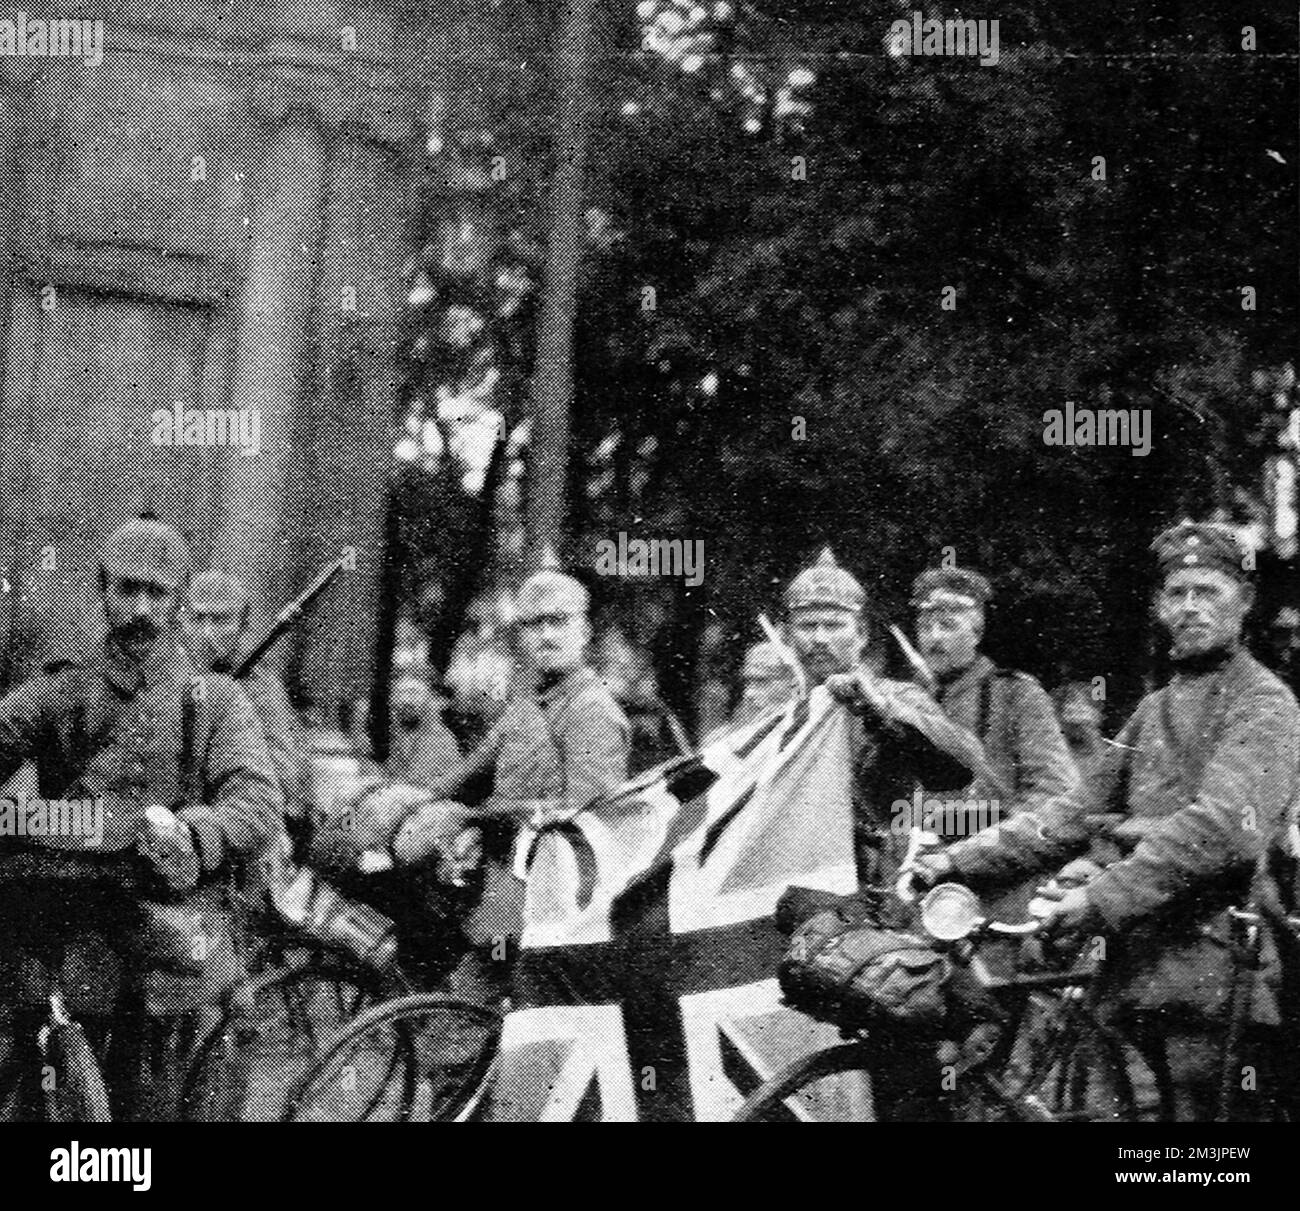 German soldiers flaunting the Union Jack flag in Bruges during their westward advance into Belgium in October 1914. Stock Photo